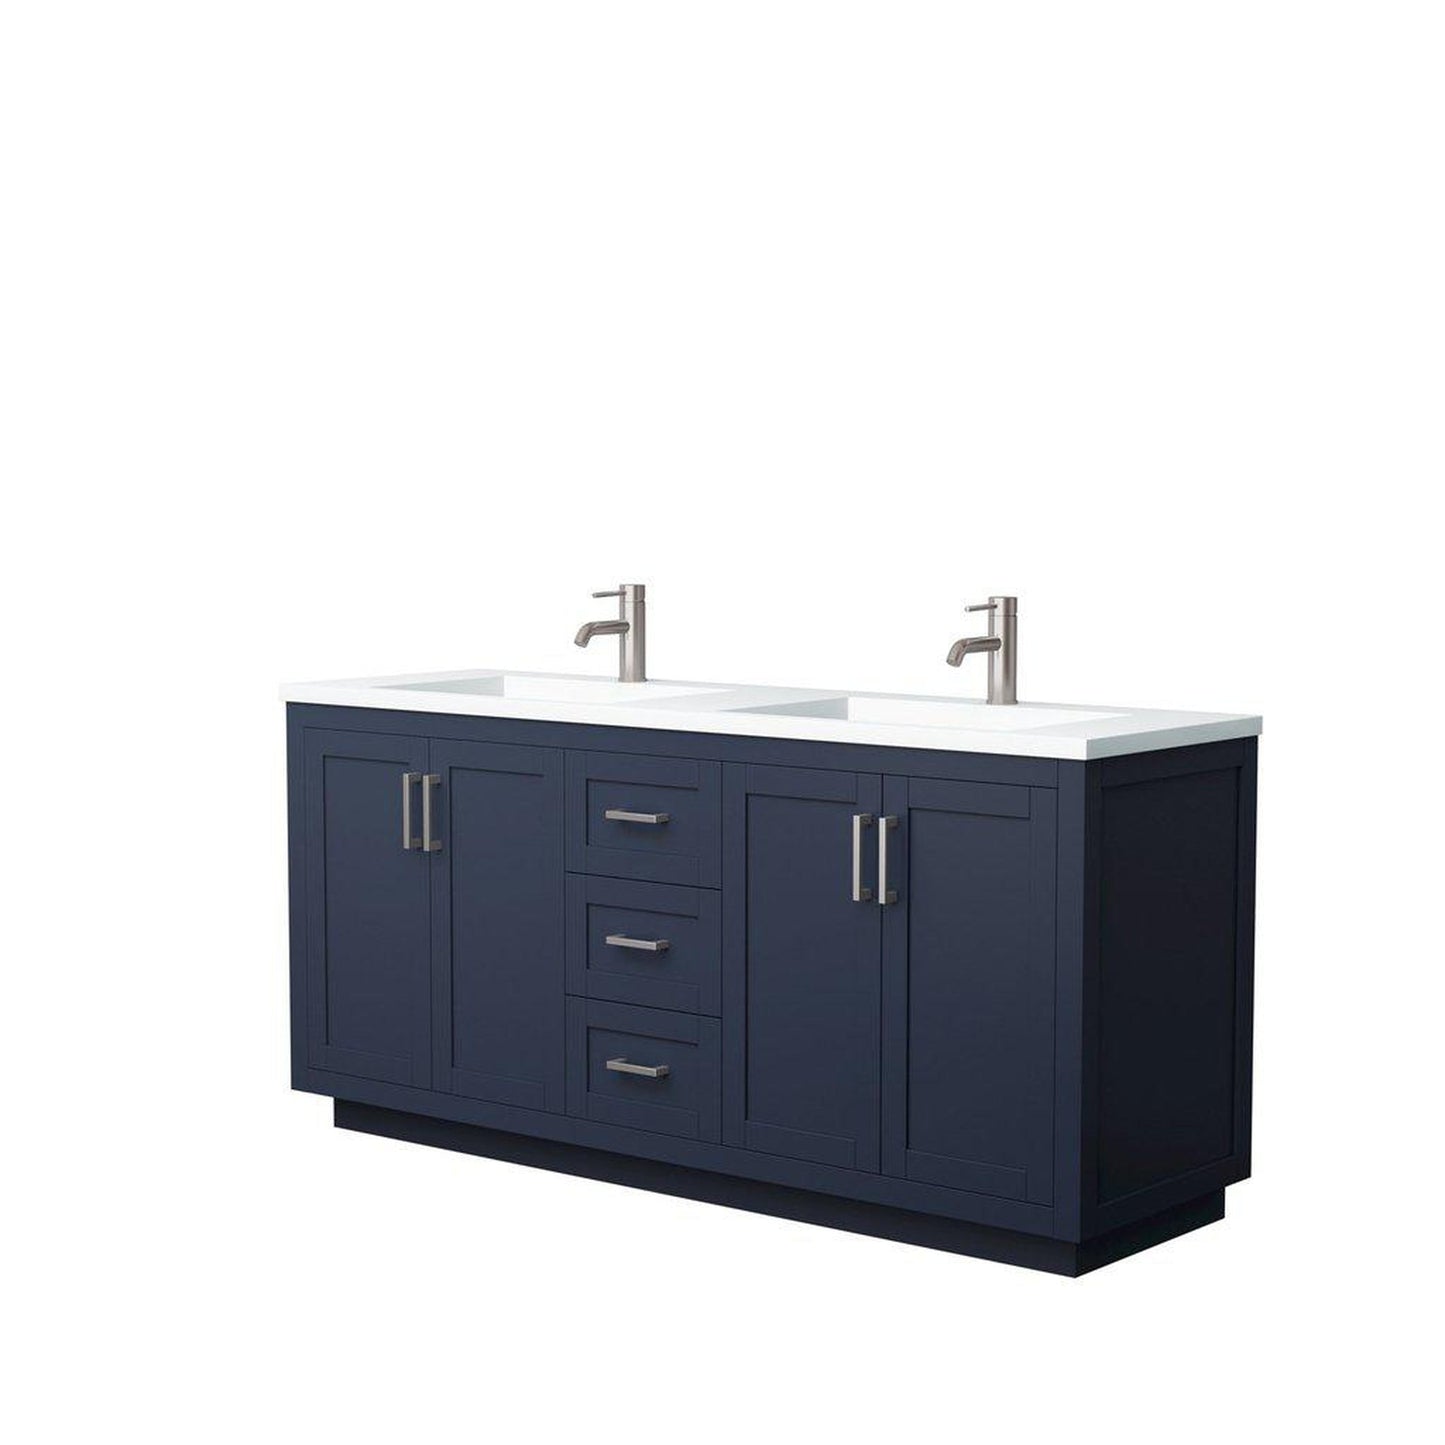 Wyndham Collection Miranda 72" Double Bathroom Dark Blue Vanity Set With 1.25" Thick Matte White Solid Surface Countertop, Integrated Sink, And Brushed Nickel Trim